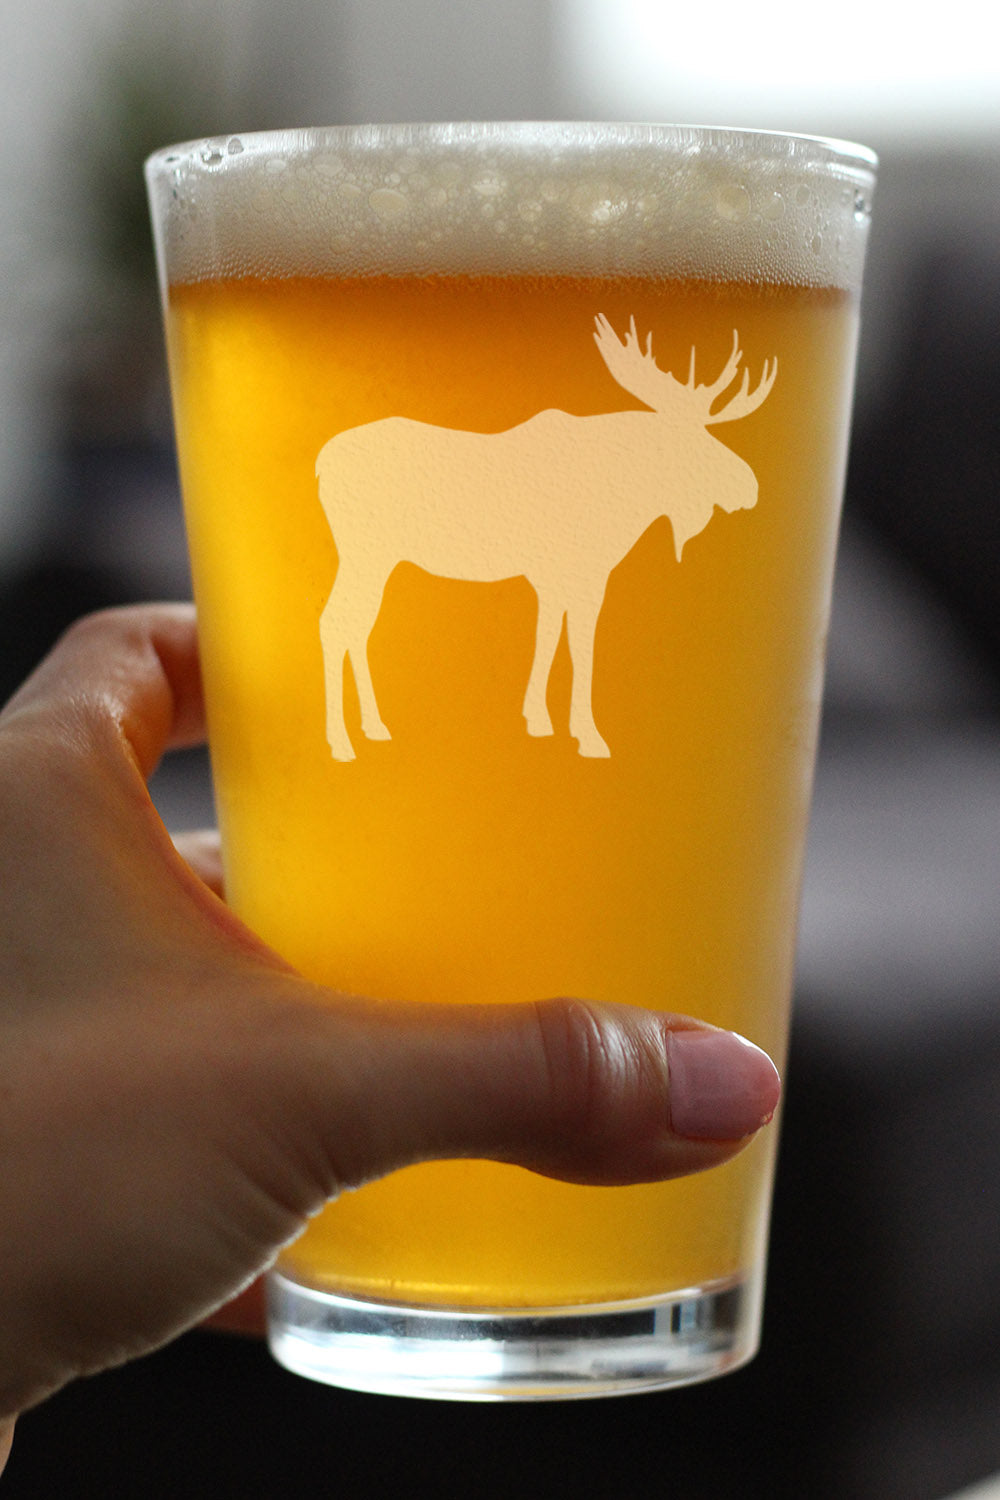 Moose - 16 oz Pint Glass for Beer - Cabin Themed Gifts or Rustic Decor for Men and Women - Fun Drinking or Party Glasses